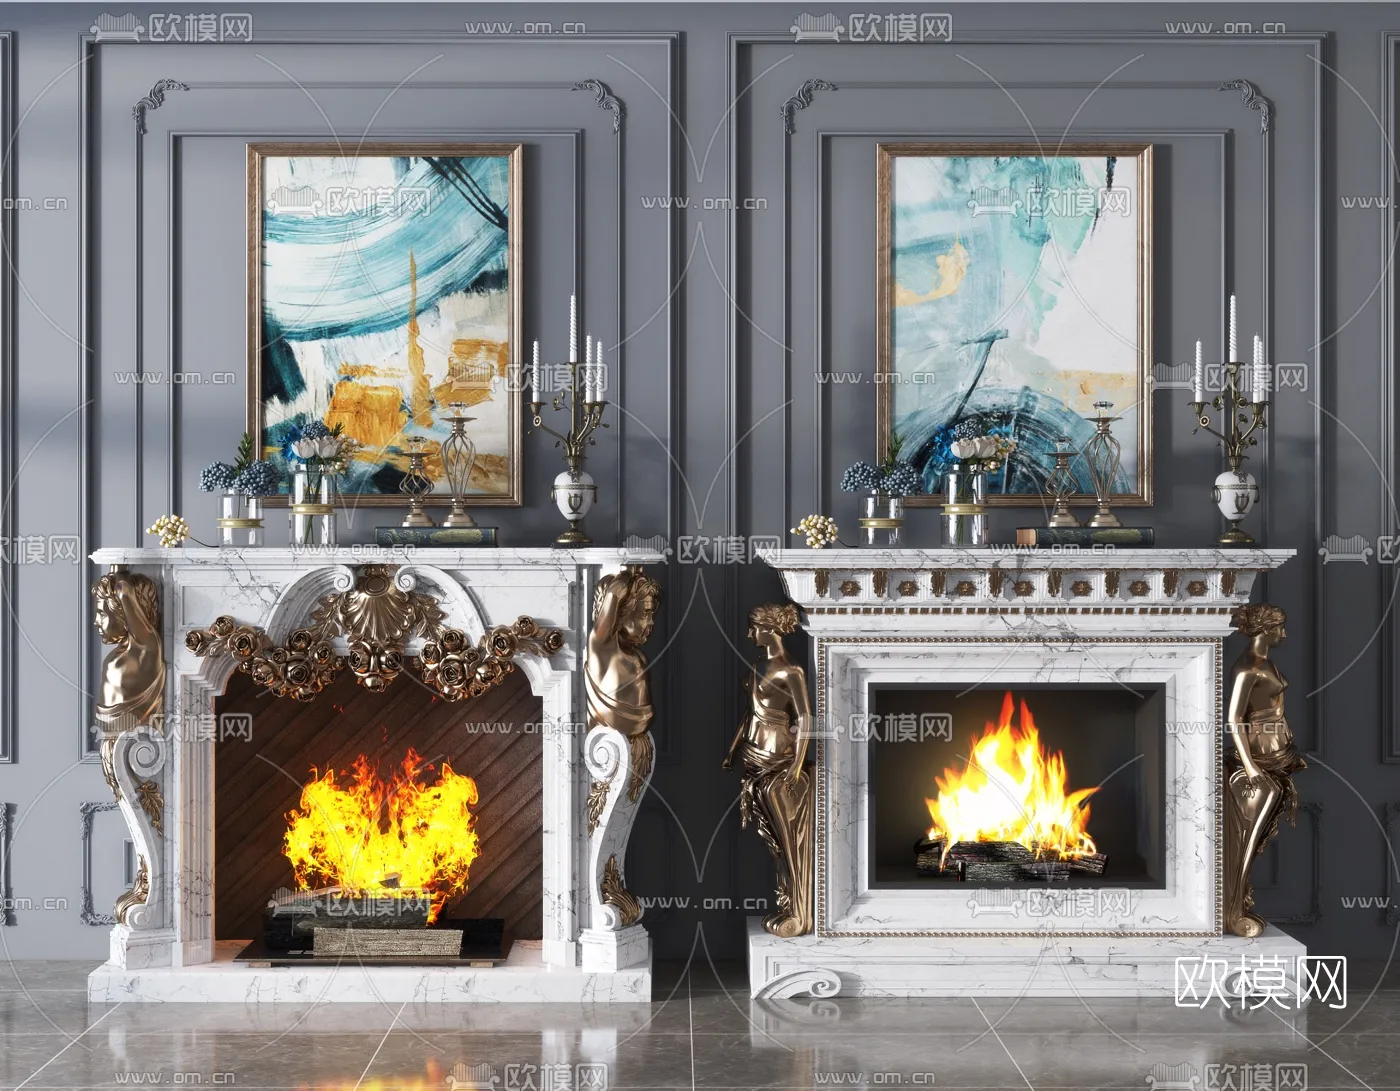 CLASSIC – FIREPLACE 3DMODELS – 035